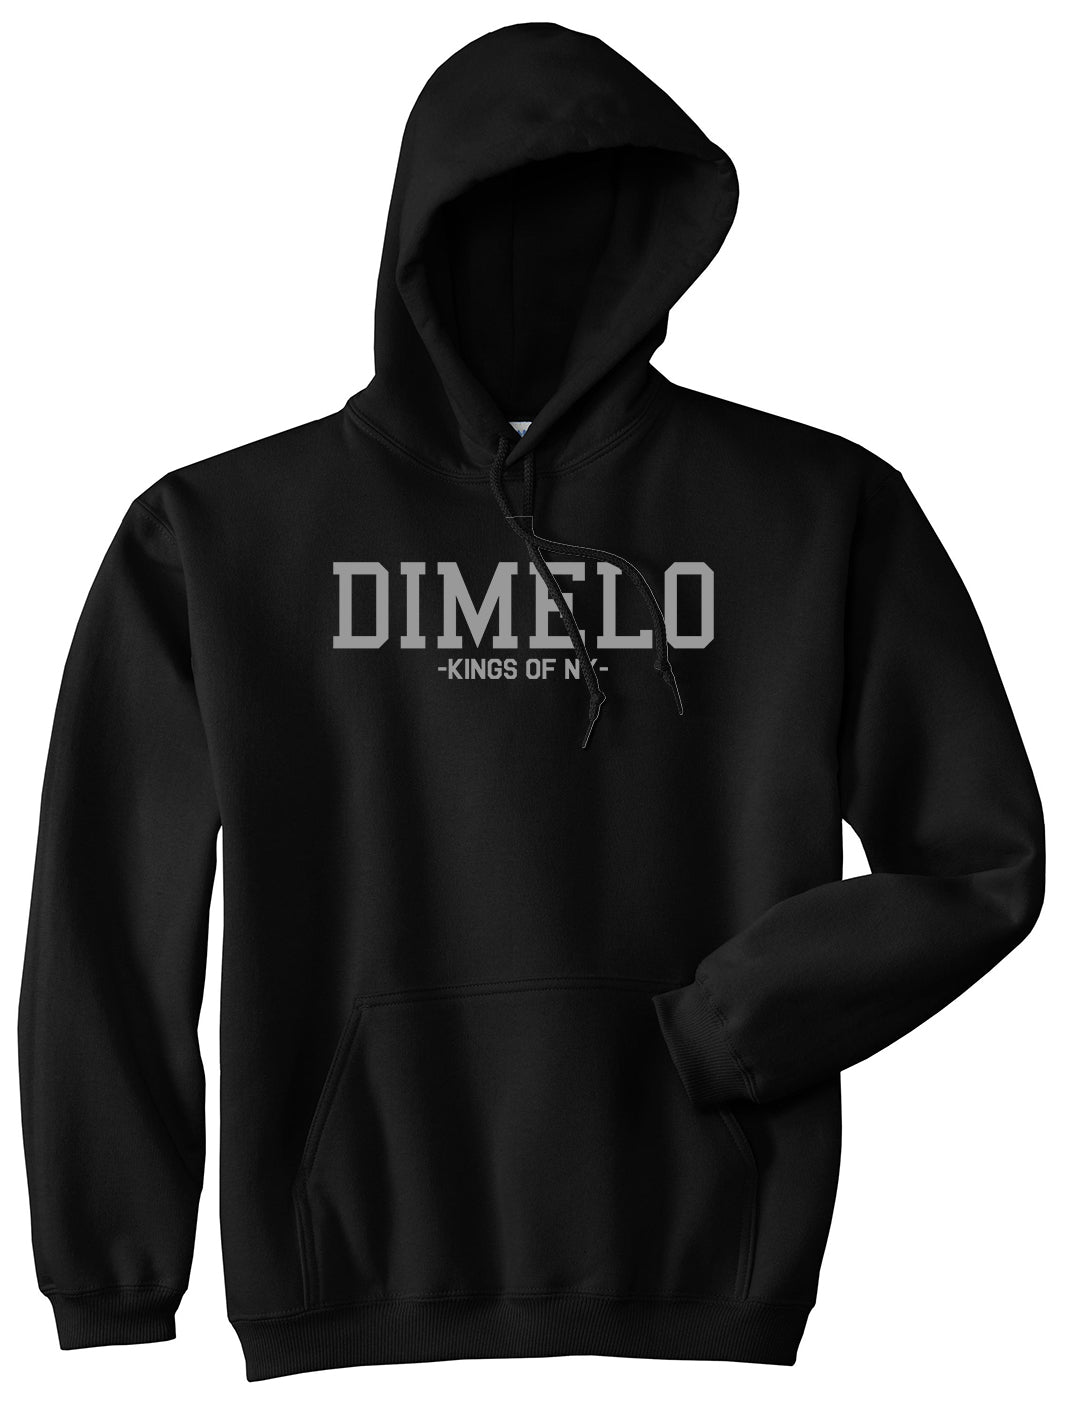 Dimelo Kings Of NY Pullover Hoodie in Black